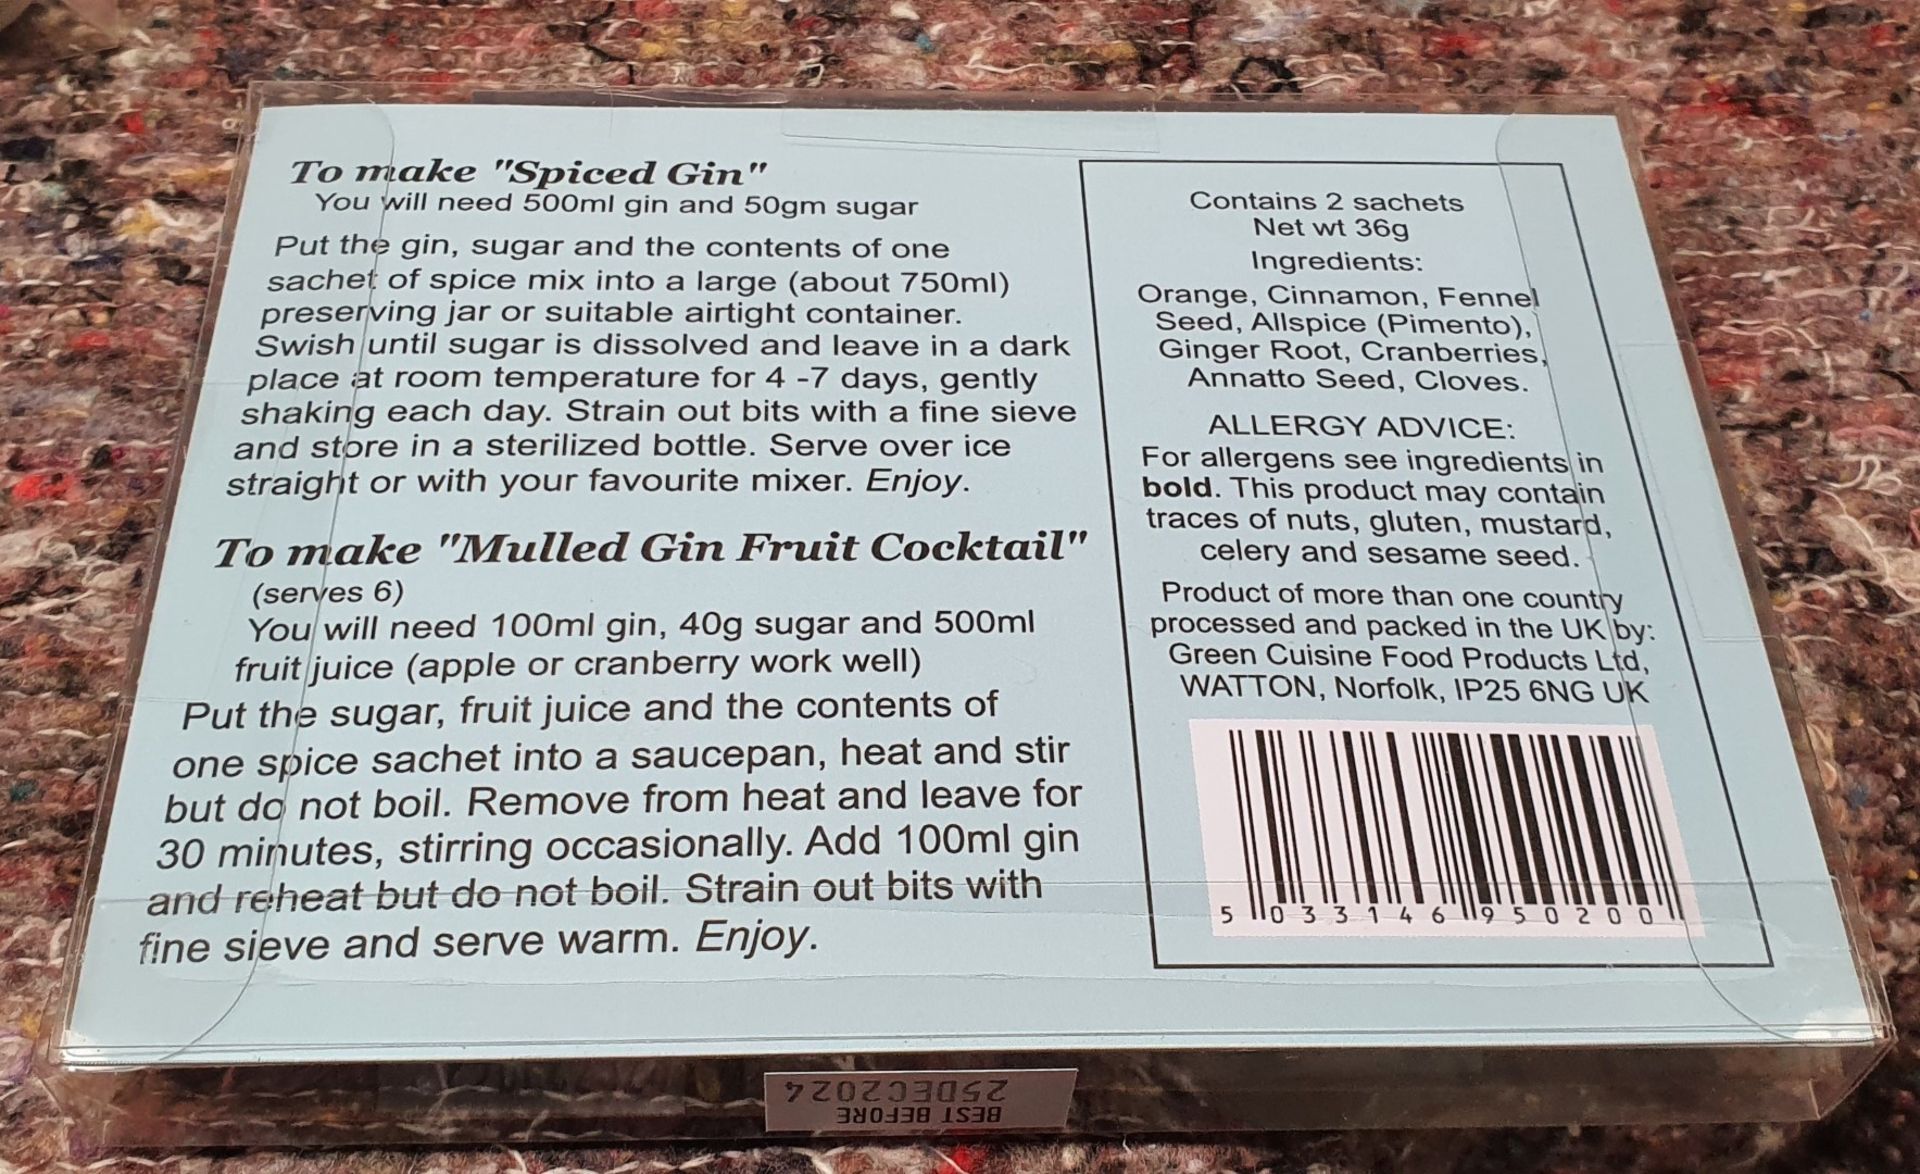 33 x Packs of Green Cuisine Pouchettes - Multipack Flavours Include Mulled Cider, Mulled Wine, - Image 4 of 10